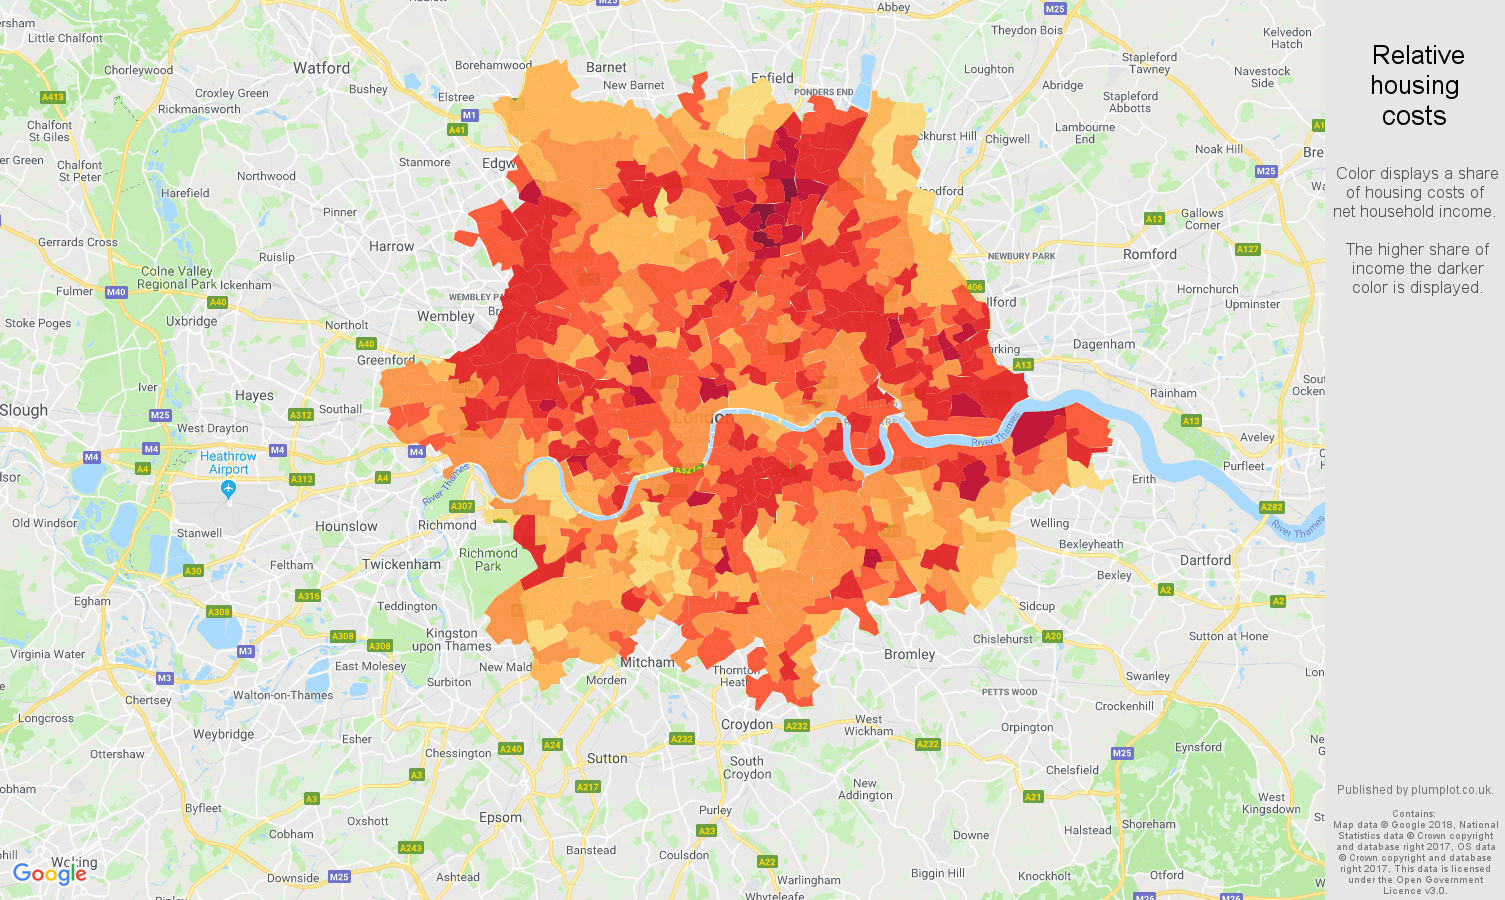 Inner London relative housing costs map